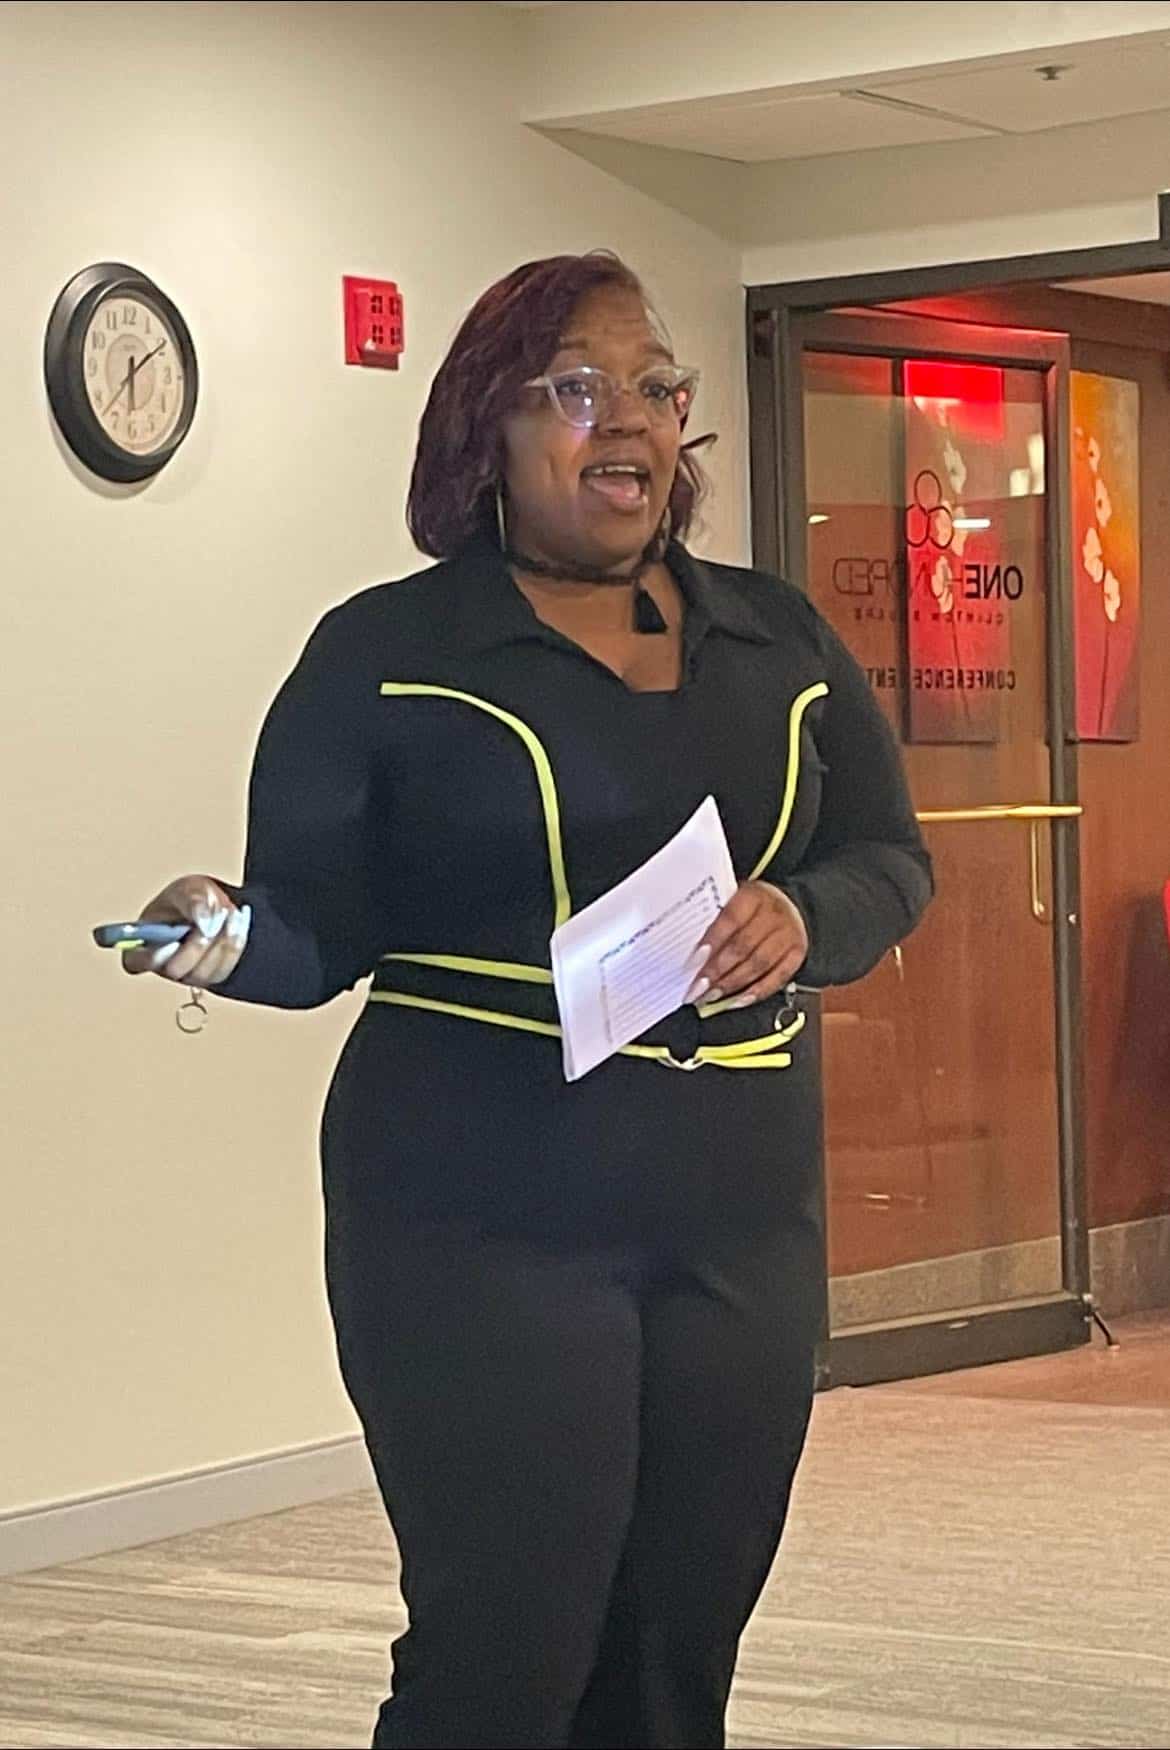 Executive Director Sheena Solomon addresses the room wearing a black and yellow jumpsuit while holding some documents..